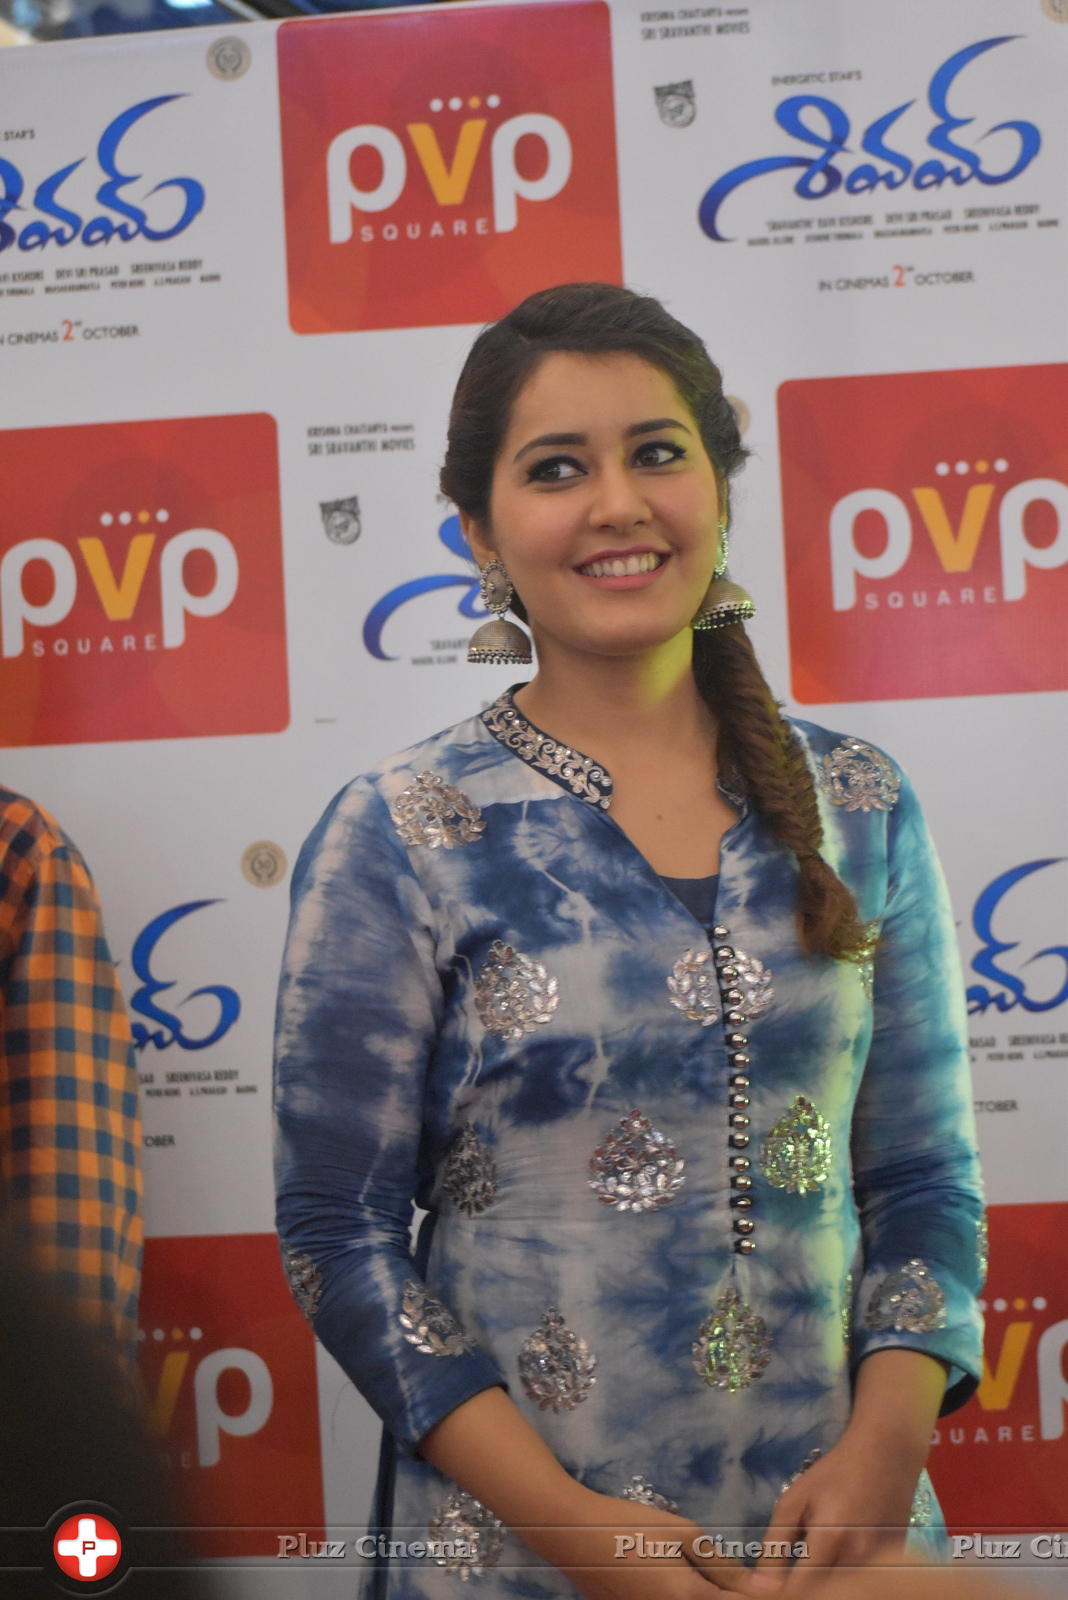 Raashi Khanna - Shivam Movie Promotion at PVP Square Mall Photos | Picture 1125314